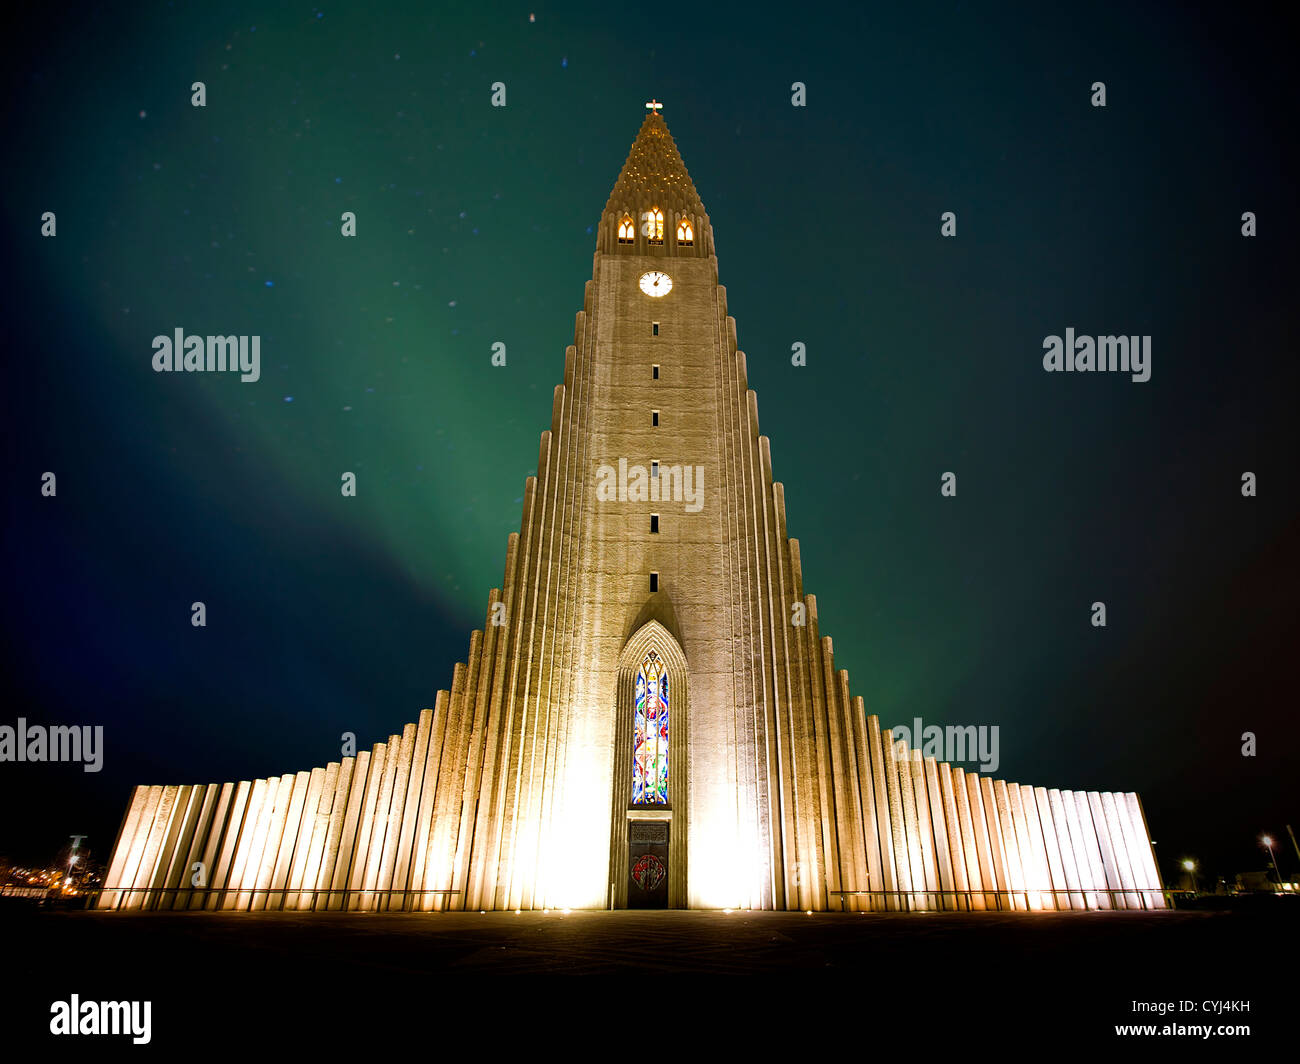 Northern lights shining over the church in Reykjavik Stock Photo